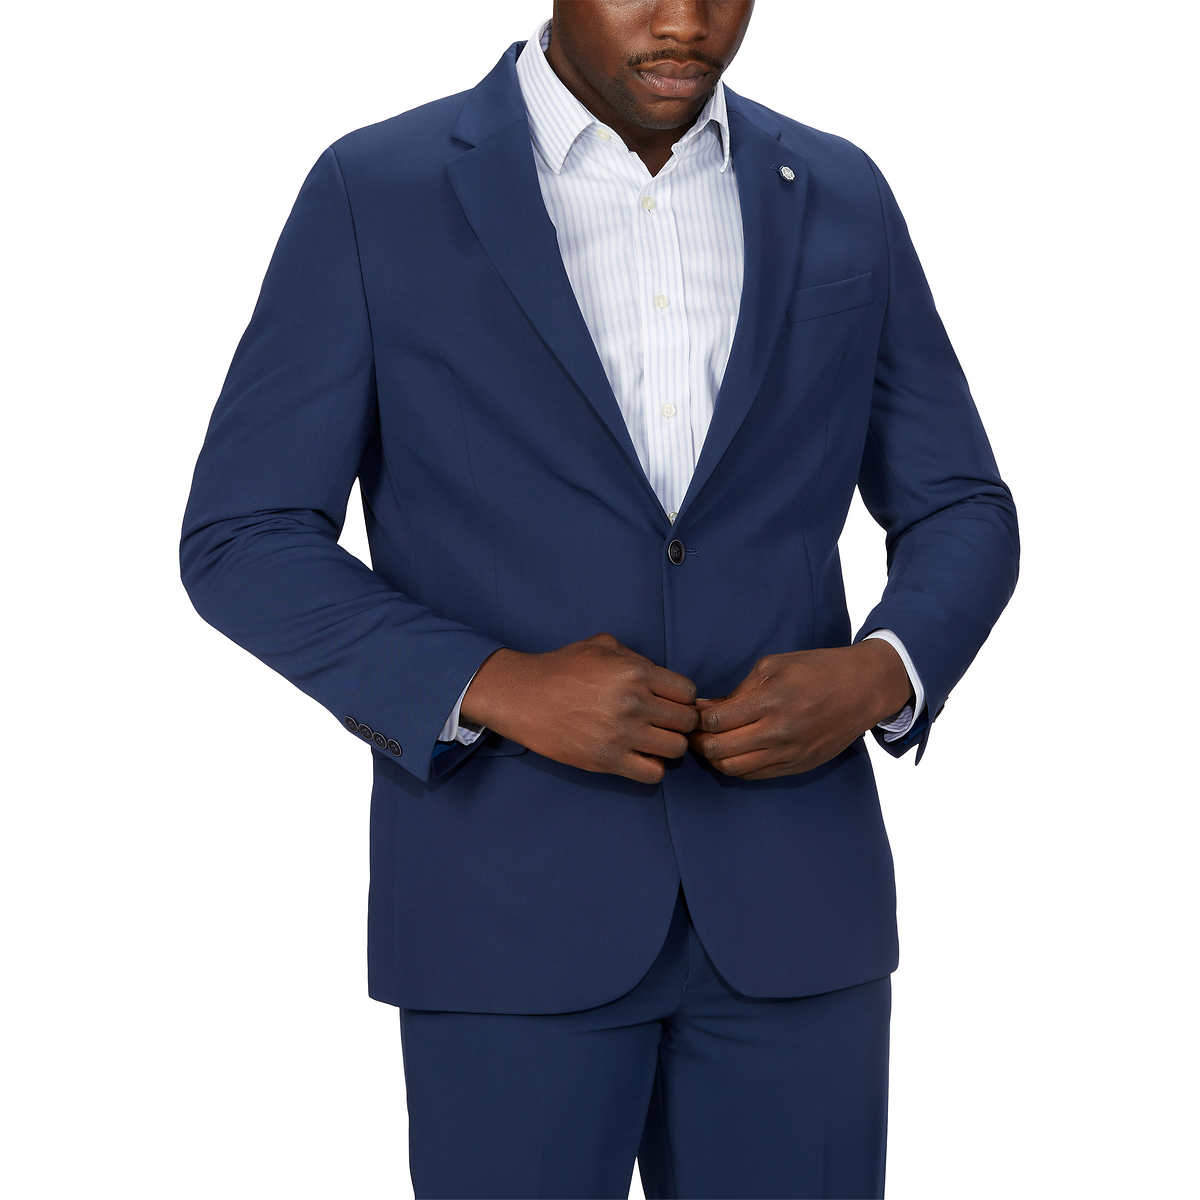 Costco - Nautica Men’s Suit Separate Jacket and Pants for $95 delivered  - $94.98